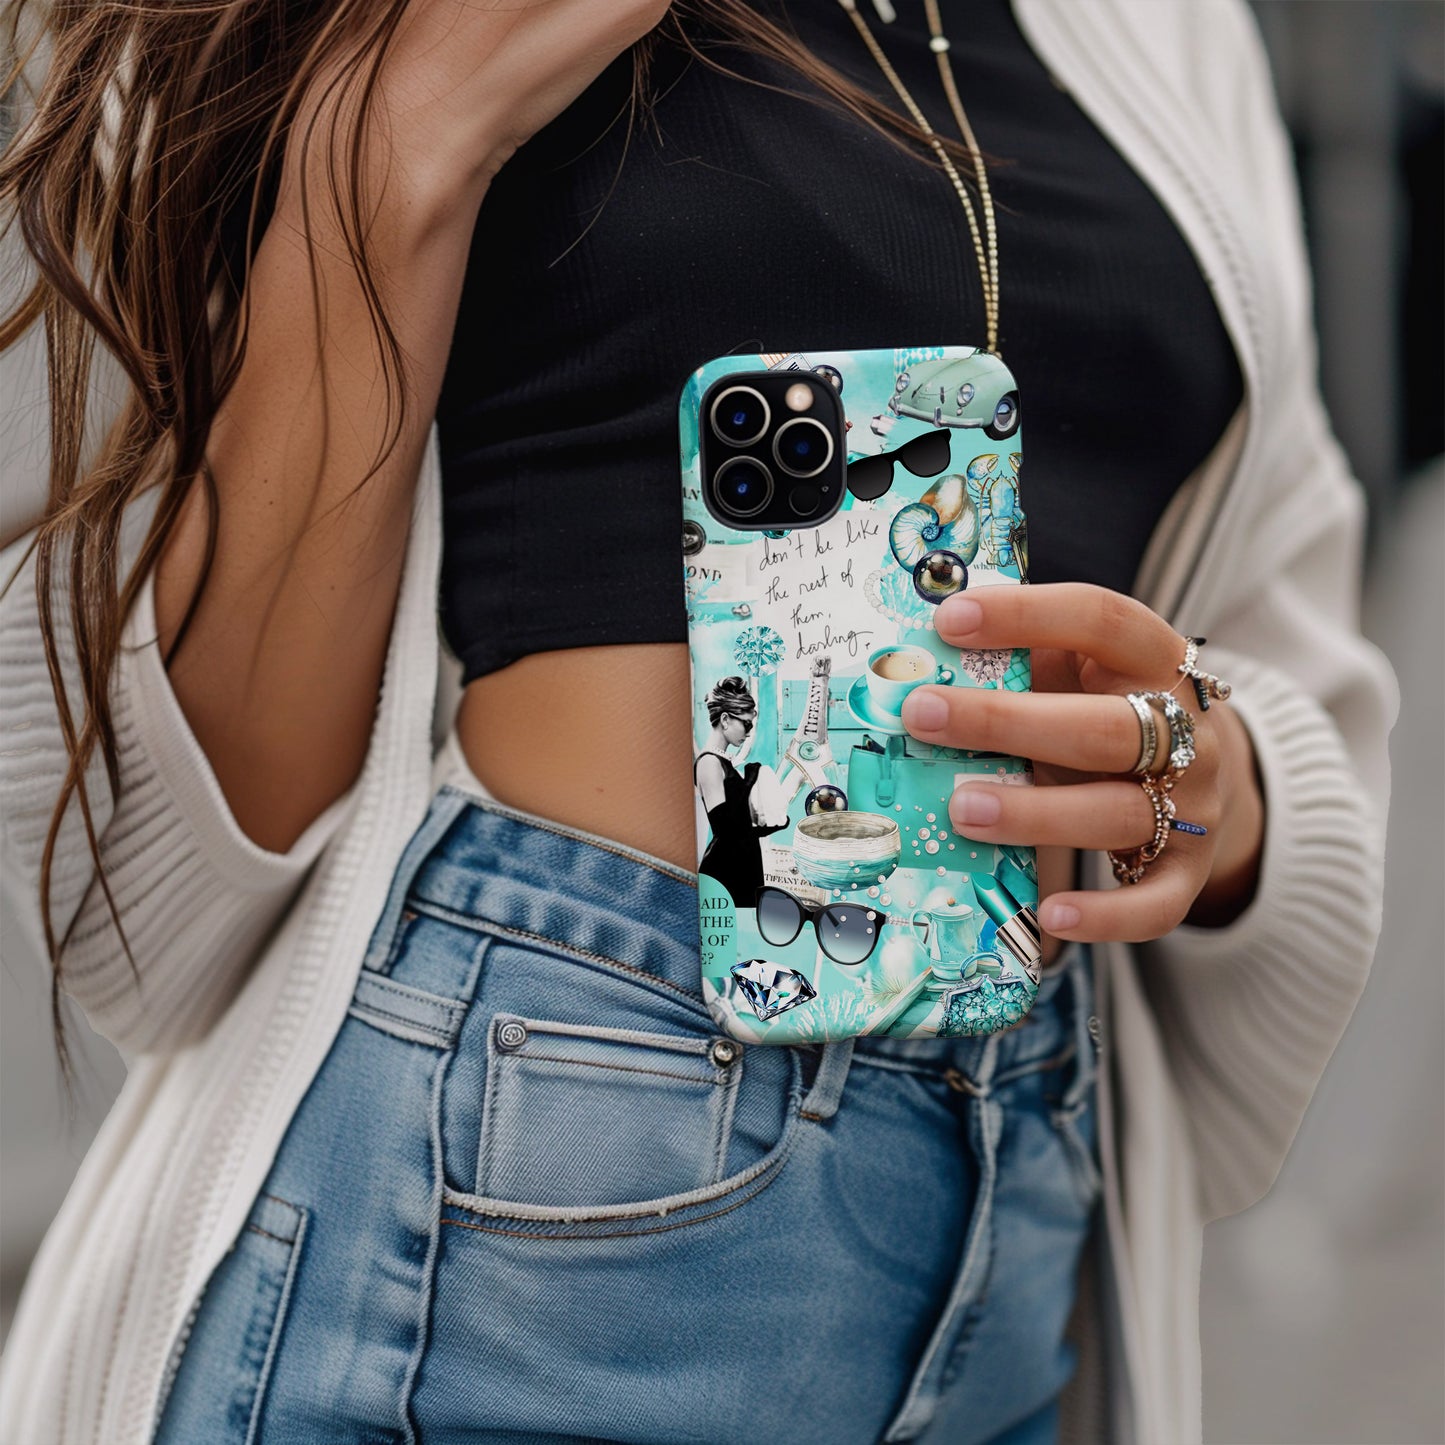 Girl holding Tiffany Blue Collage Phone Case. Breakfast at Tiffany's iconic phone case by Artscape Market